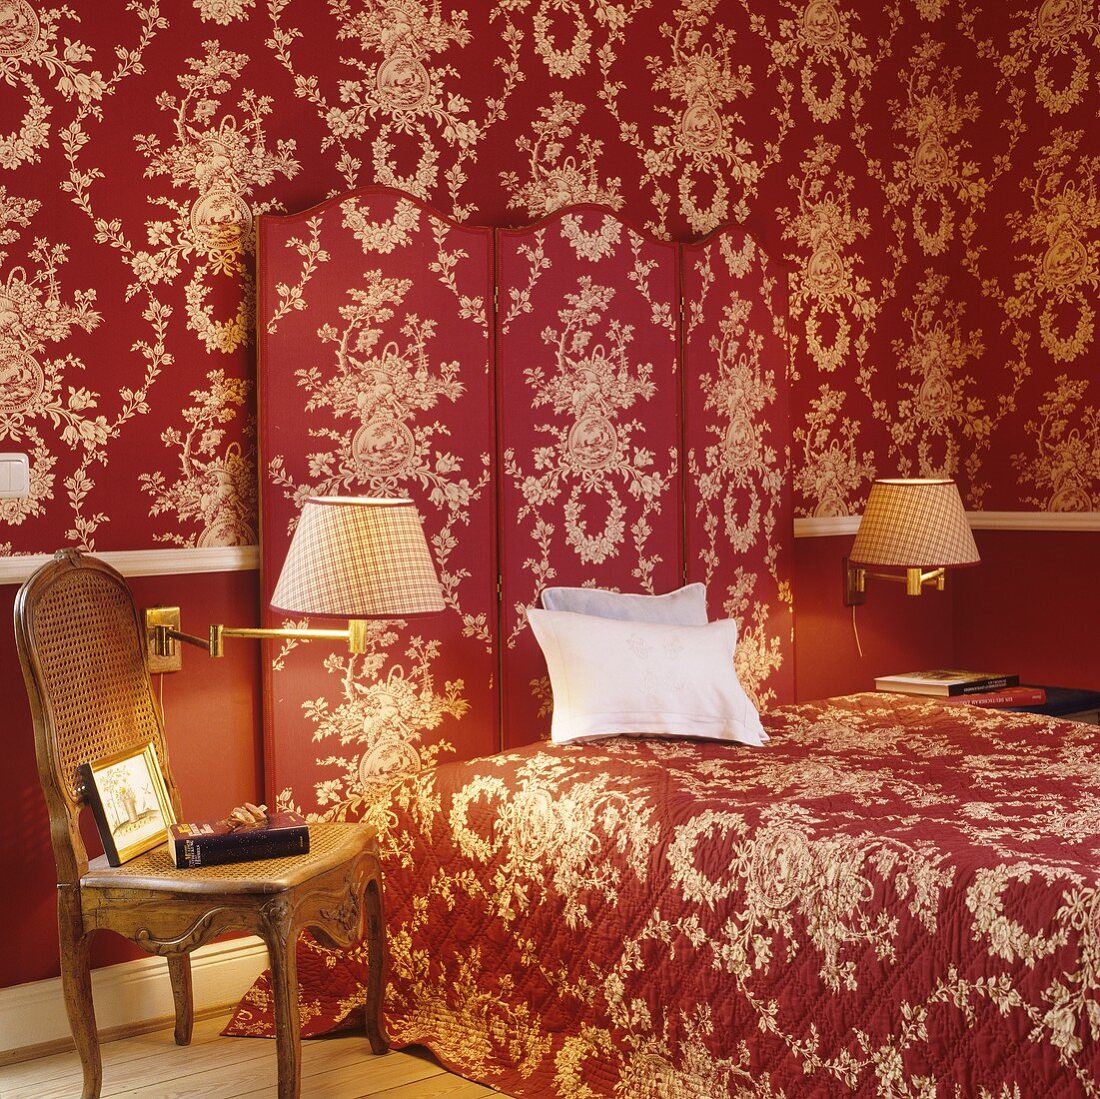 A bedroom with a red and white floral pattern on the wallpaper, the paravent and the bed cover